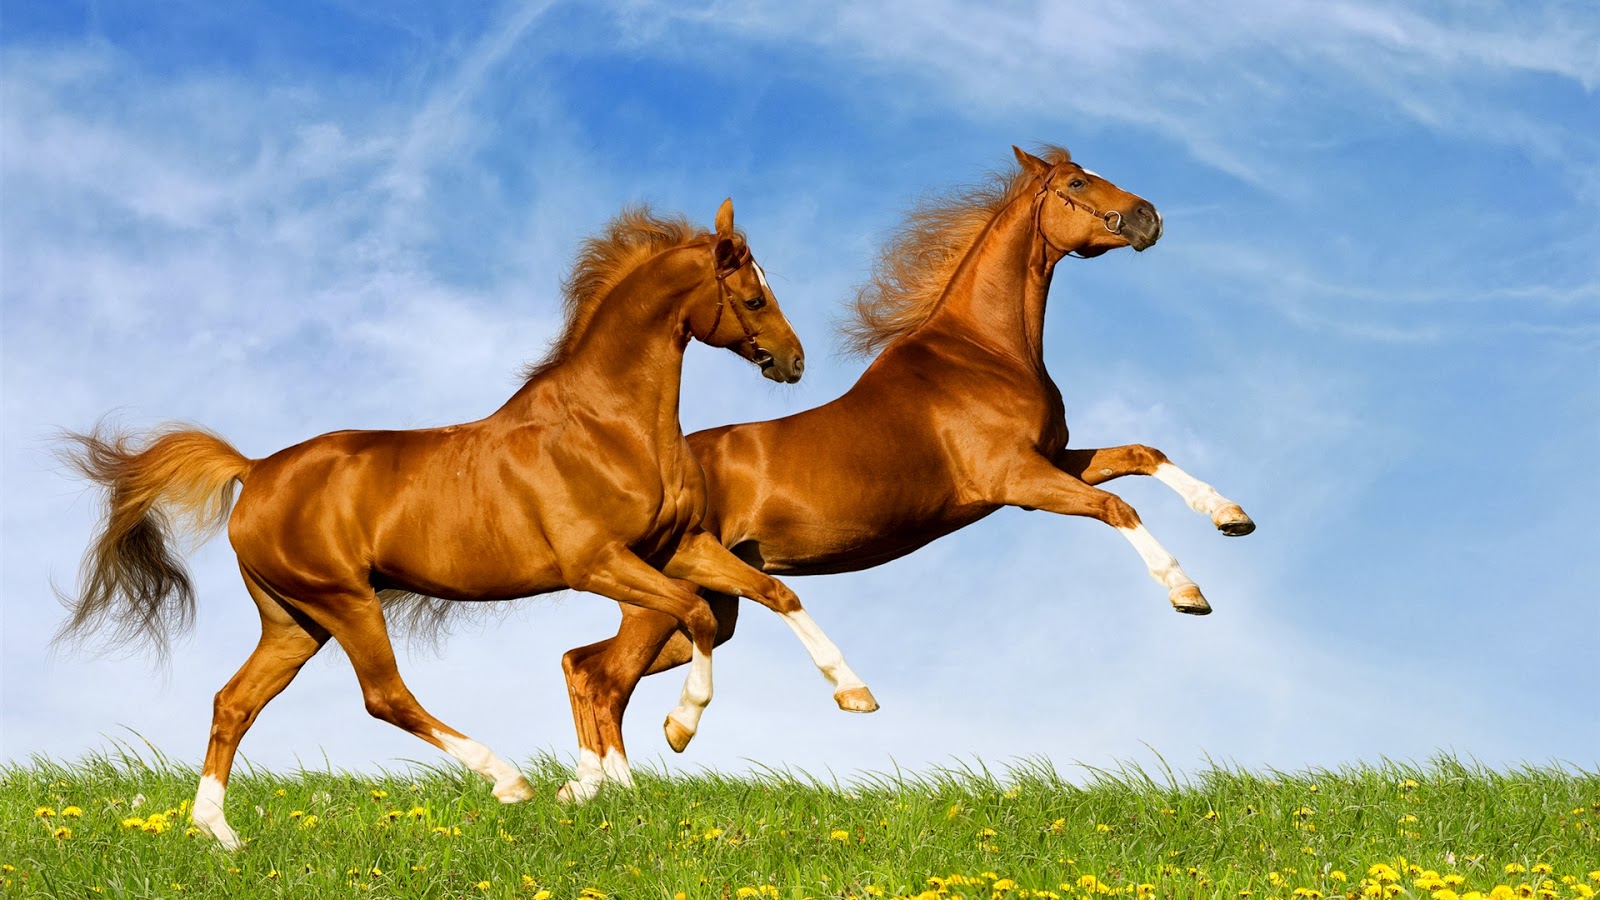 Horse And Make This HD Wallpaper Desktop For Your